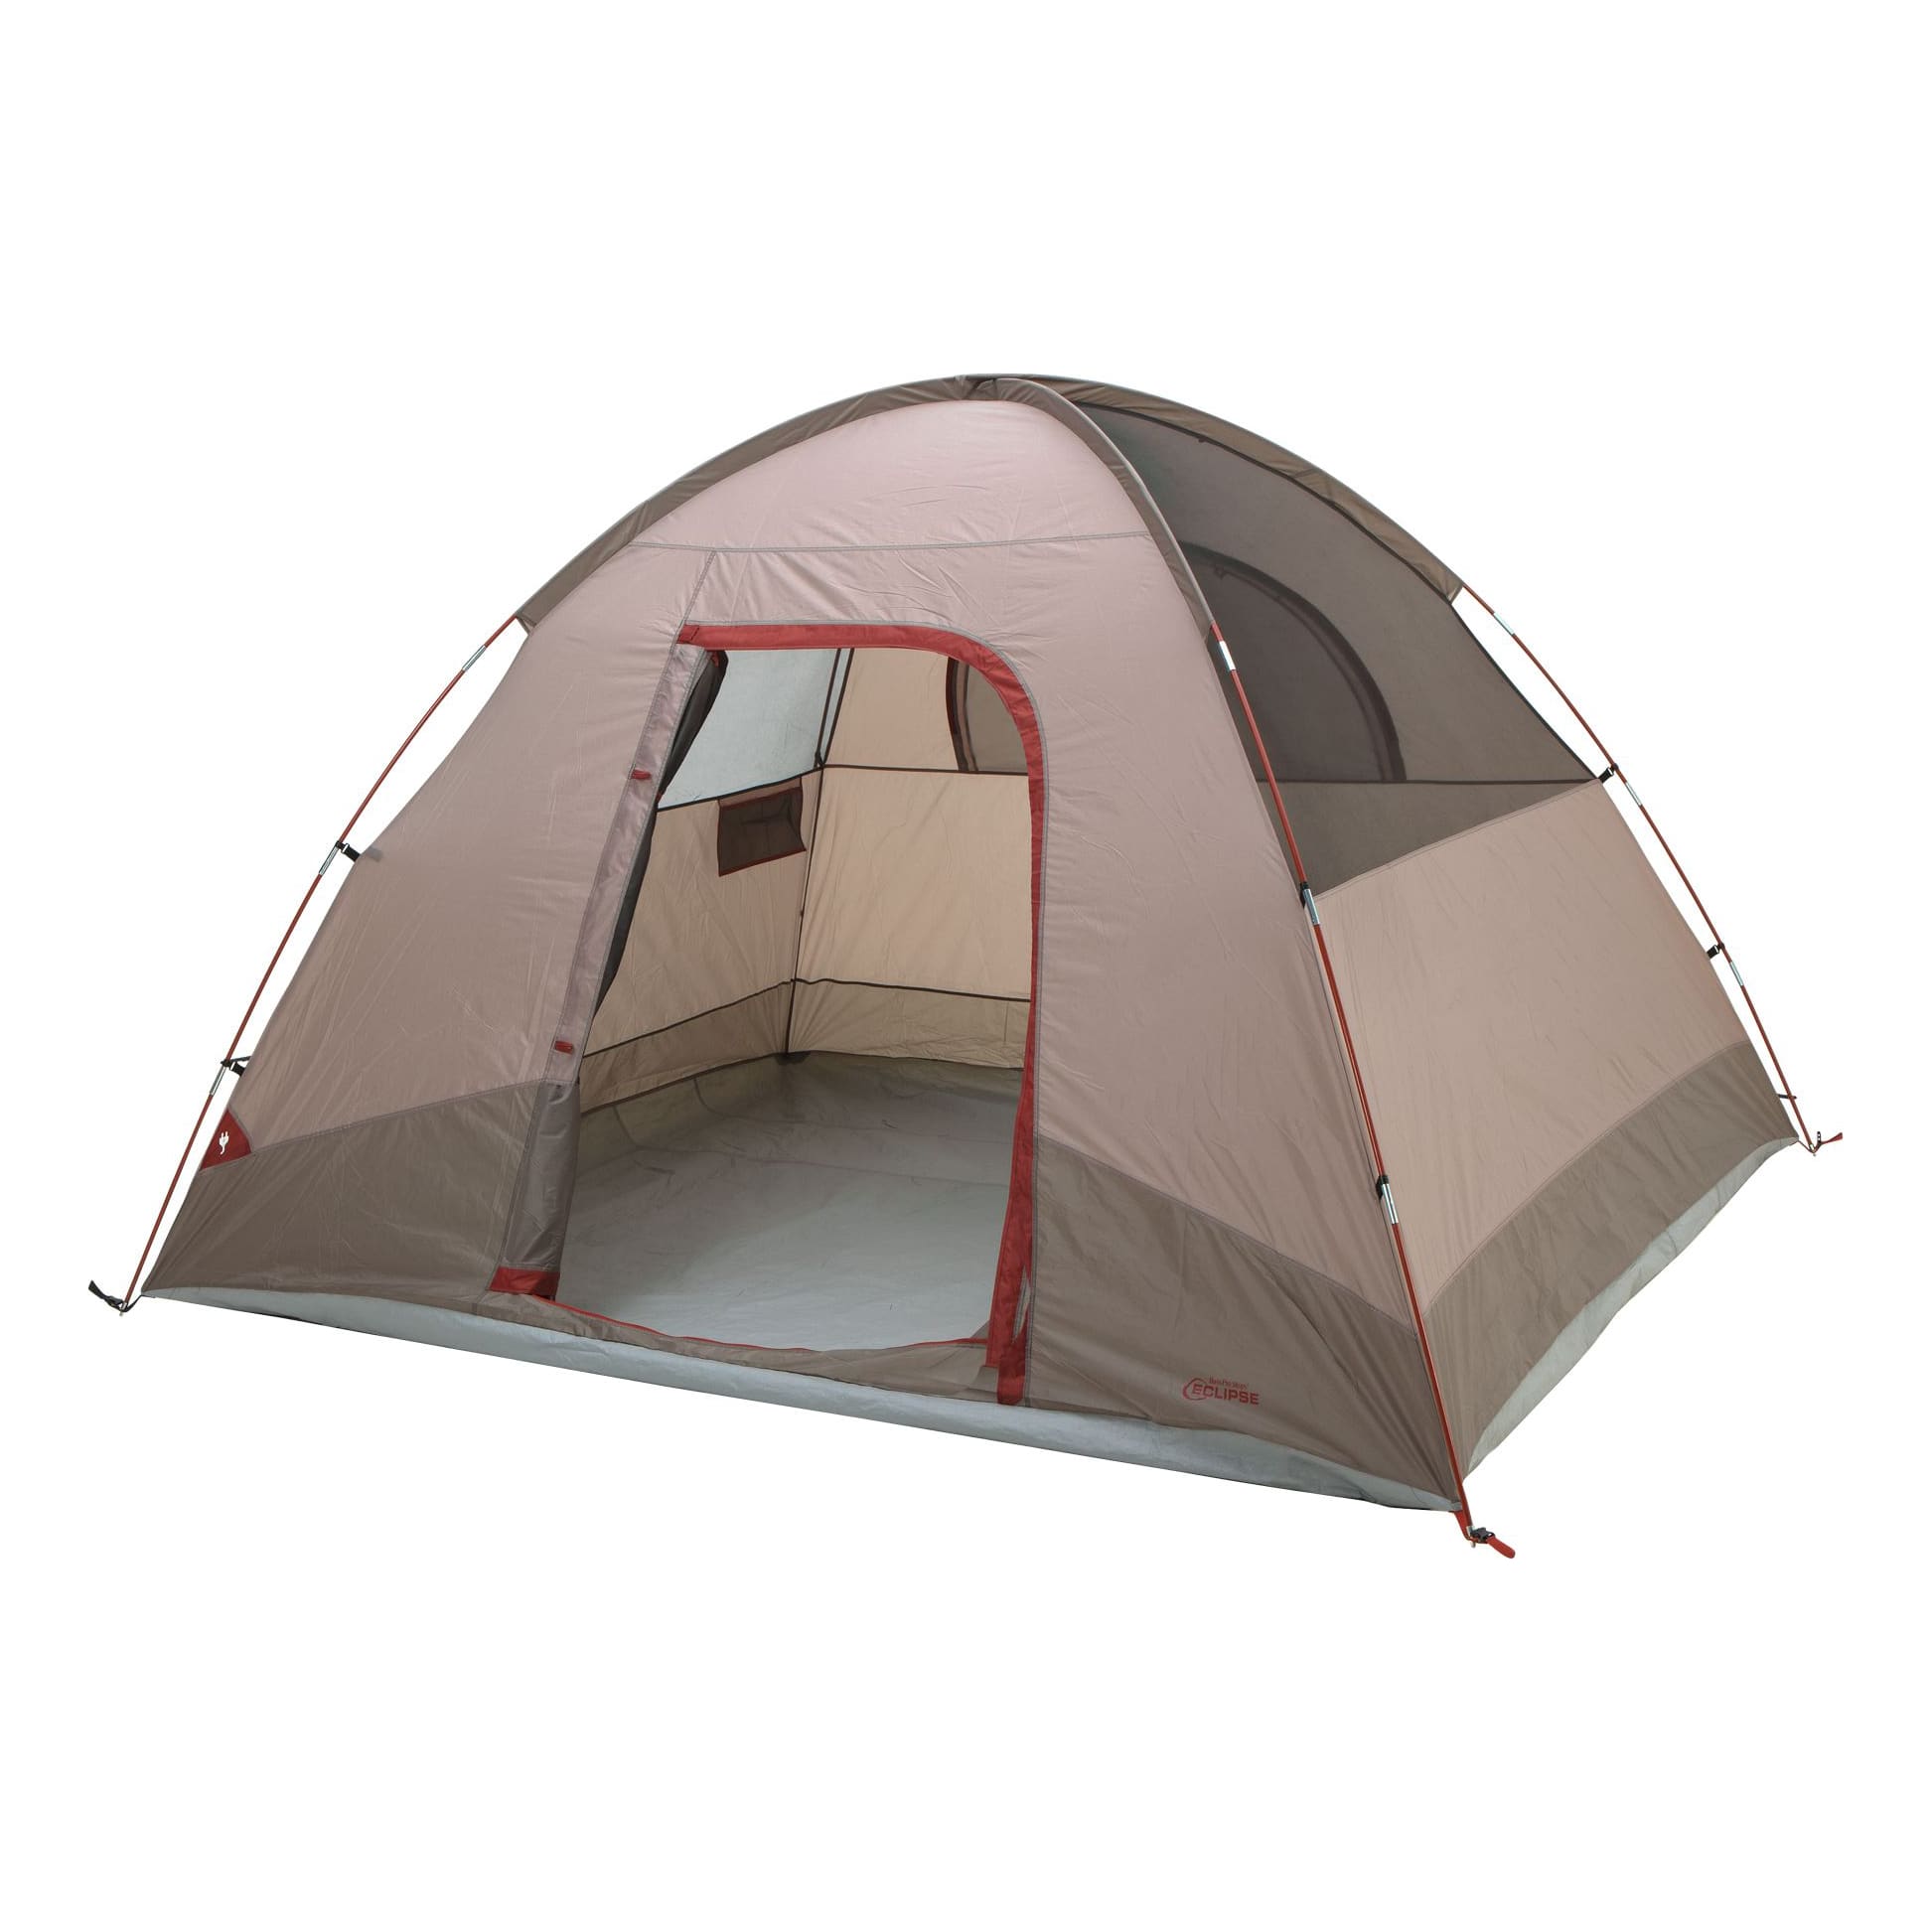 Bass Pro Shops® Eclipse™ Voyager 6-Person Tent with Screen Porch - Door View